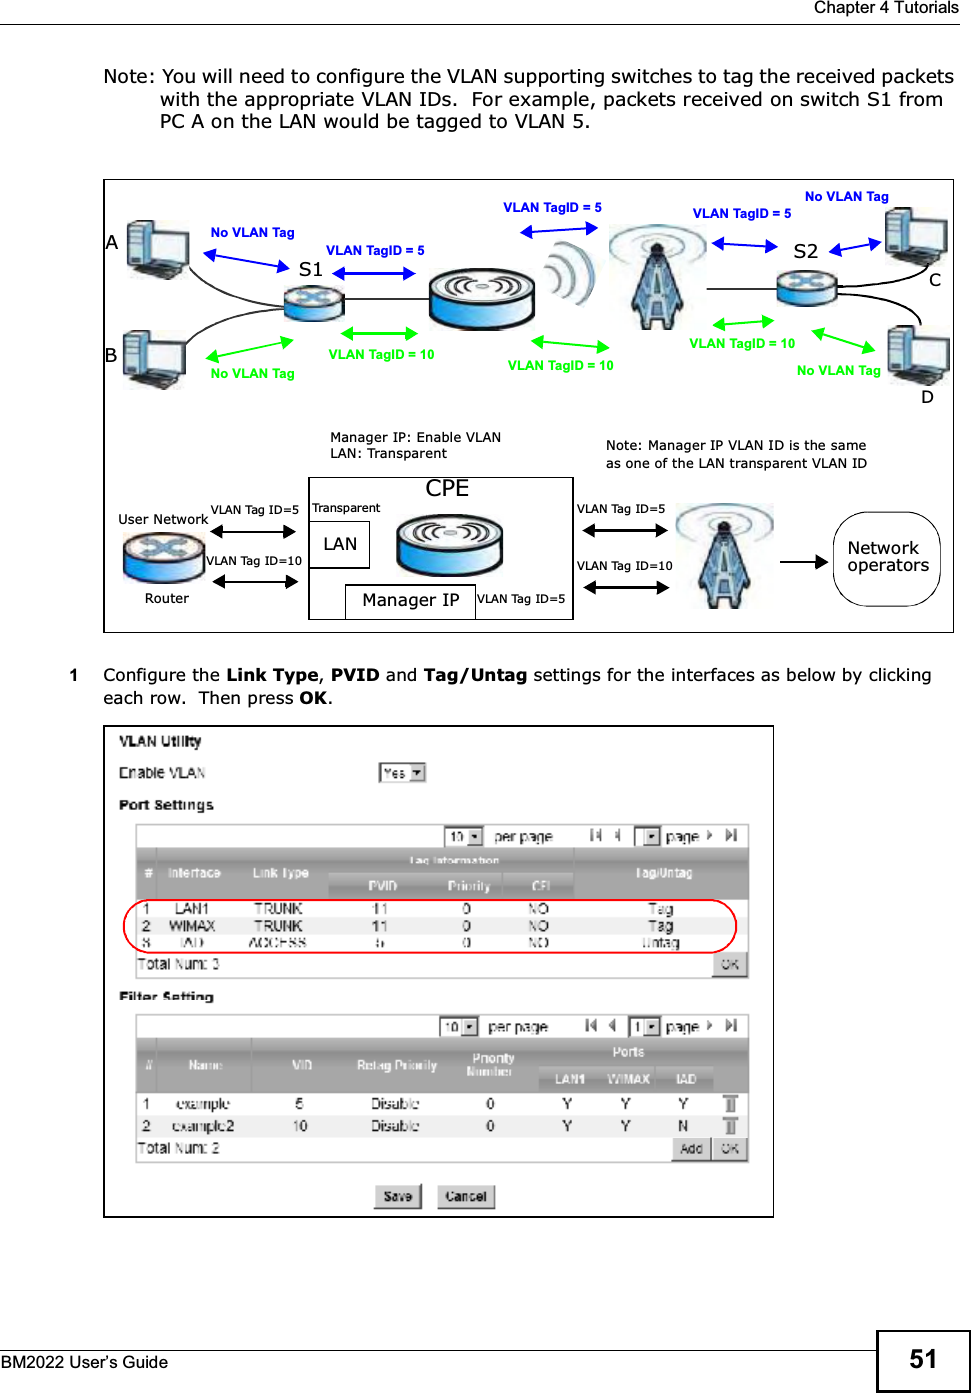  Chapter 4 TutorialsBM2022 Users Guide 51Note: You will need to configure the VLAN supporting switches to tag the received packets with the appropriate VLAN IDs.  For example, packets received on switch S1 from PC A on the LAN would be tagged to VLAN 5.  1Configure the Link Type, PVID and Tag/Untag settings for the interfaces as below by clicking each row.  Then press OK. VLAN TagID = 5VLAN TagID = 10ABNo VLAN TagNo VLAN TagVLAN TagID = 5VLAN TagID = 5VLAN TagID = 10VLAN TagID = 10 No VLAN TagNo VLAN TagCDS1 S2CPELANManager IPUser NetworkRouterManager IP: Enable VLAN LAN: TransparentNetworkoperatorsTransparentNote: Manager IP VLAN ID is the same as one of the LAN transparent VLAN IDVLAN Tag ID=5VLAN Tag ID=5VLAN Tag ID=10 VLAN Tag ID=10VLAN Tag ID=5